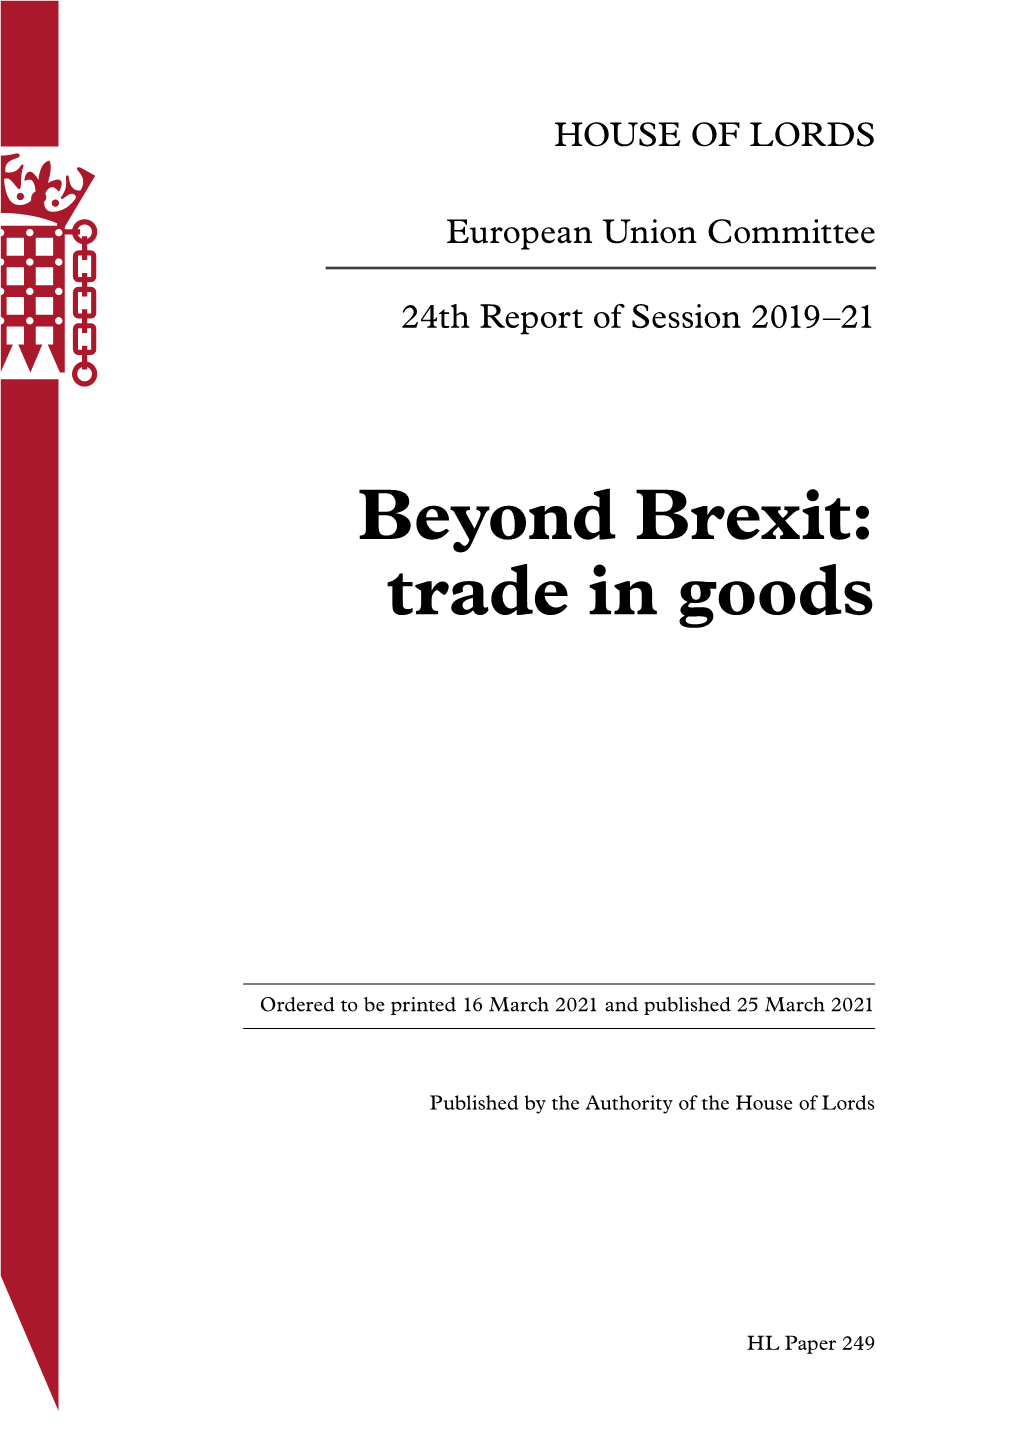 Beyond Brexit: Trade in Goods